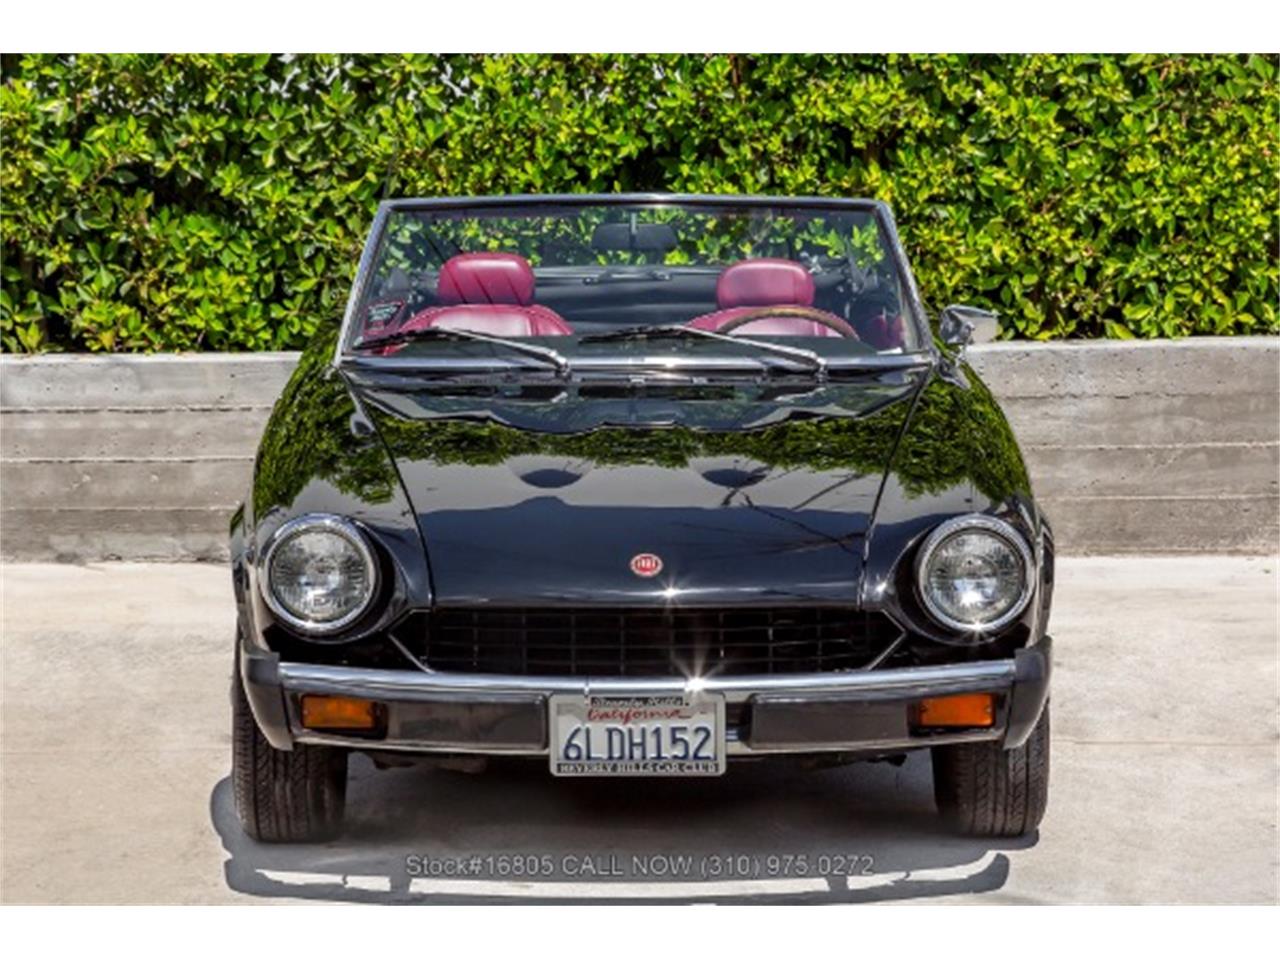 For Sale: 1978 Fiat 124 in Beverly Hills, California for sale in Beverly Hills, CA